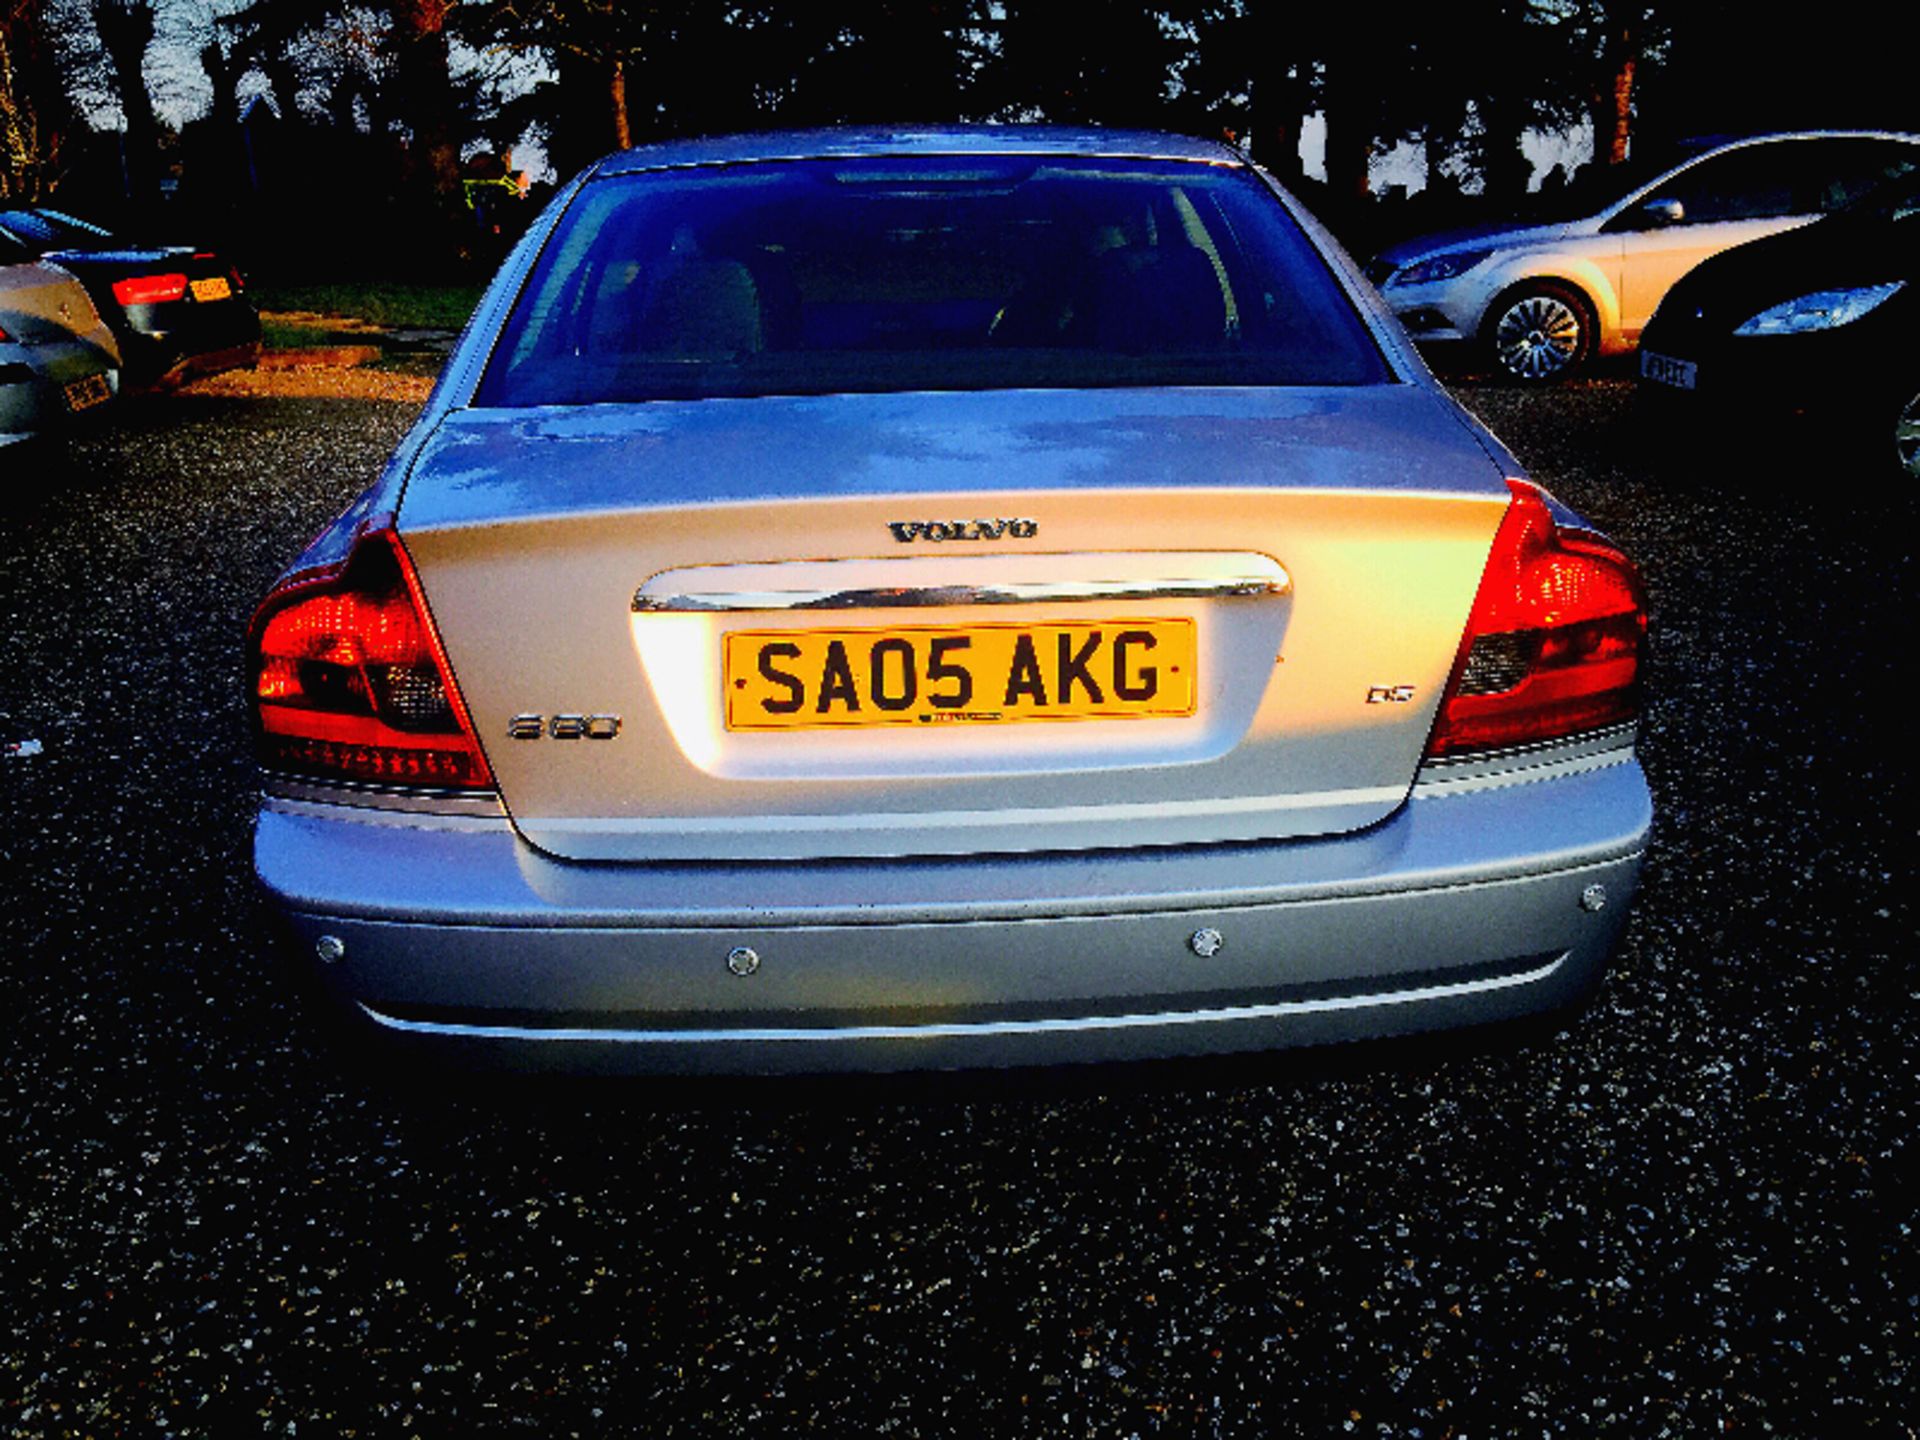 (On Sale) VOLVO S80 SE 2.4 D5 AUTO 2005(05) REG**METALLIC SILVER**A/C*CLIMATE CONTROL*FULL LEATHER* - Image 7 of 17